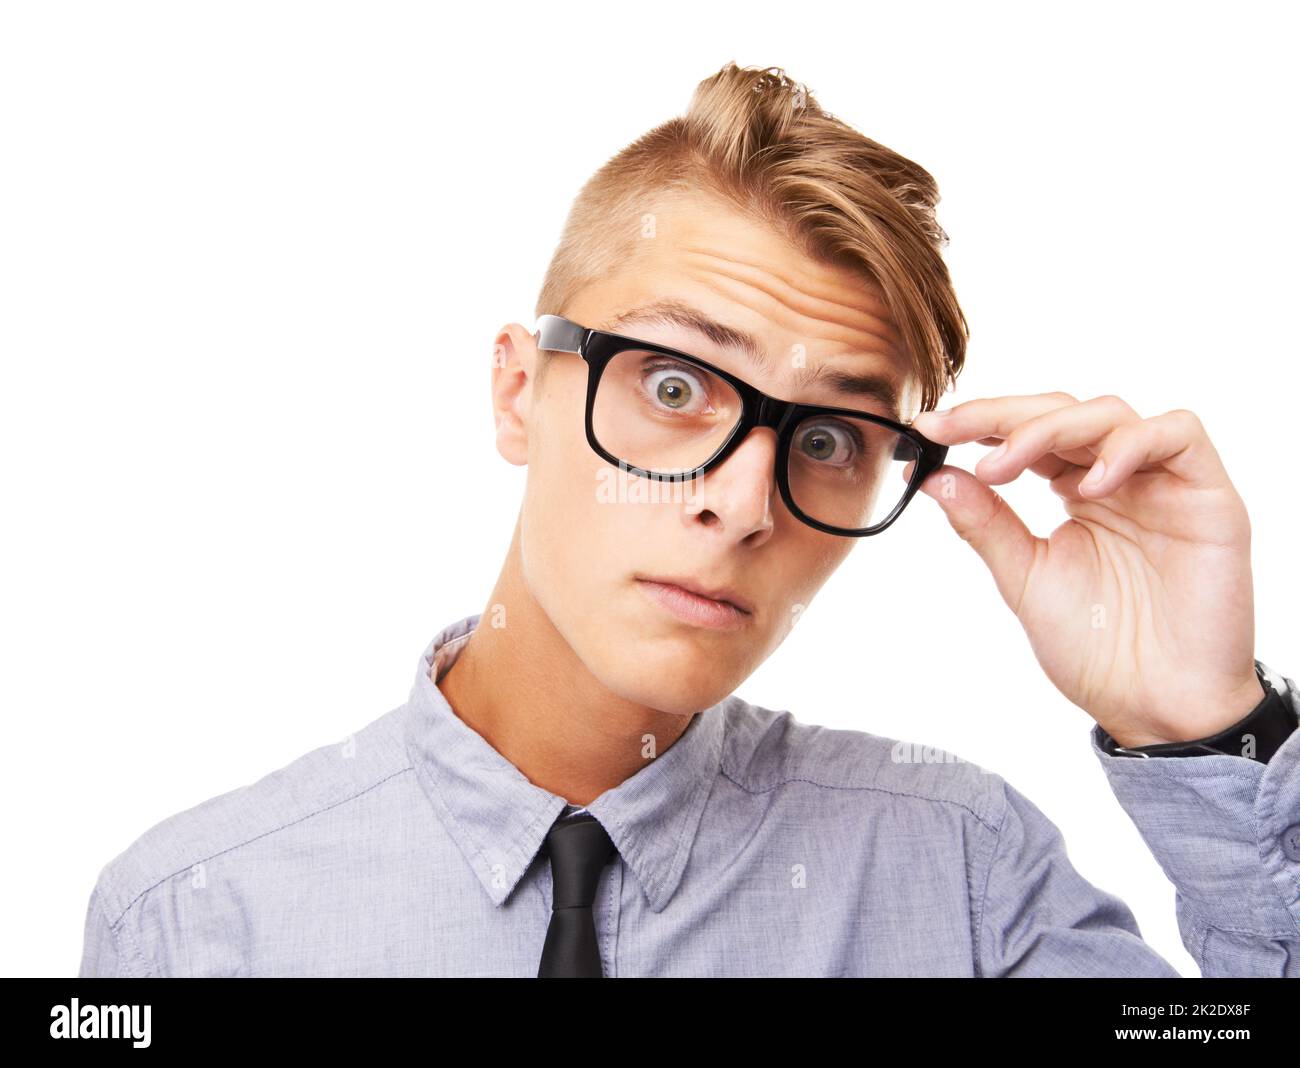 Your style is shocking. Studio portrait of an expressive young man wearing glasses isolated on white. Stock Photo